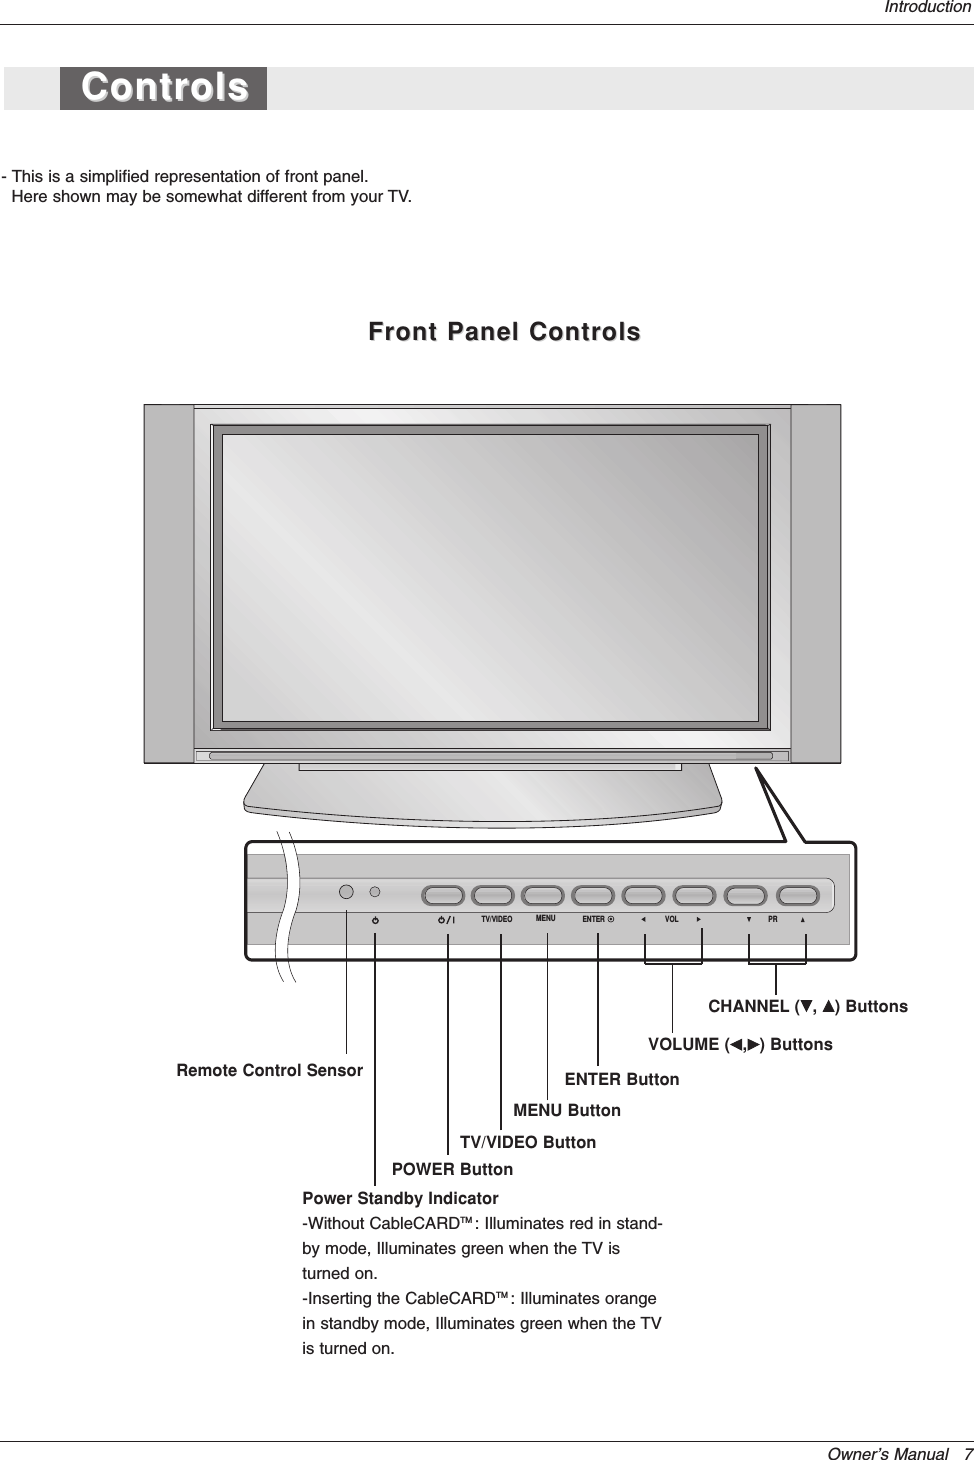 Owner’s Manual   7Introduction- This is a simplified representation of front panel. Here shown may be somewhat different from your TV.ControlsControlsFront Panel ControlsFront Panel ControlsMENU VOL PRTV/VIDEO ENTERPOWER ButtonRemote Control SensorVOLUME (F,G) ButtonsPower Standby Indicator-Without CableCARDTM : Illuminates red in stand-by mode, Illuminates green when the TV isturned on.-Inserting the CableCARDTM : Illuminates orangein standby mode, Illuminates green when the TVis turned on.CHANNEL (E, D) ButtonsMENU ButtonTV/VIDEO ButtonENTER Button